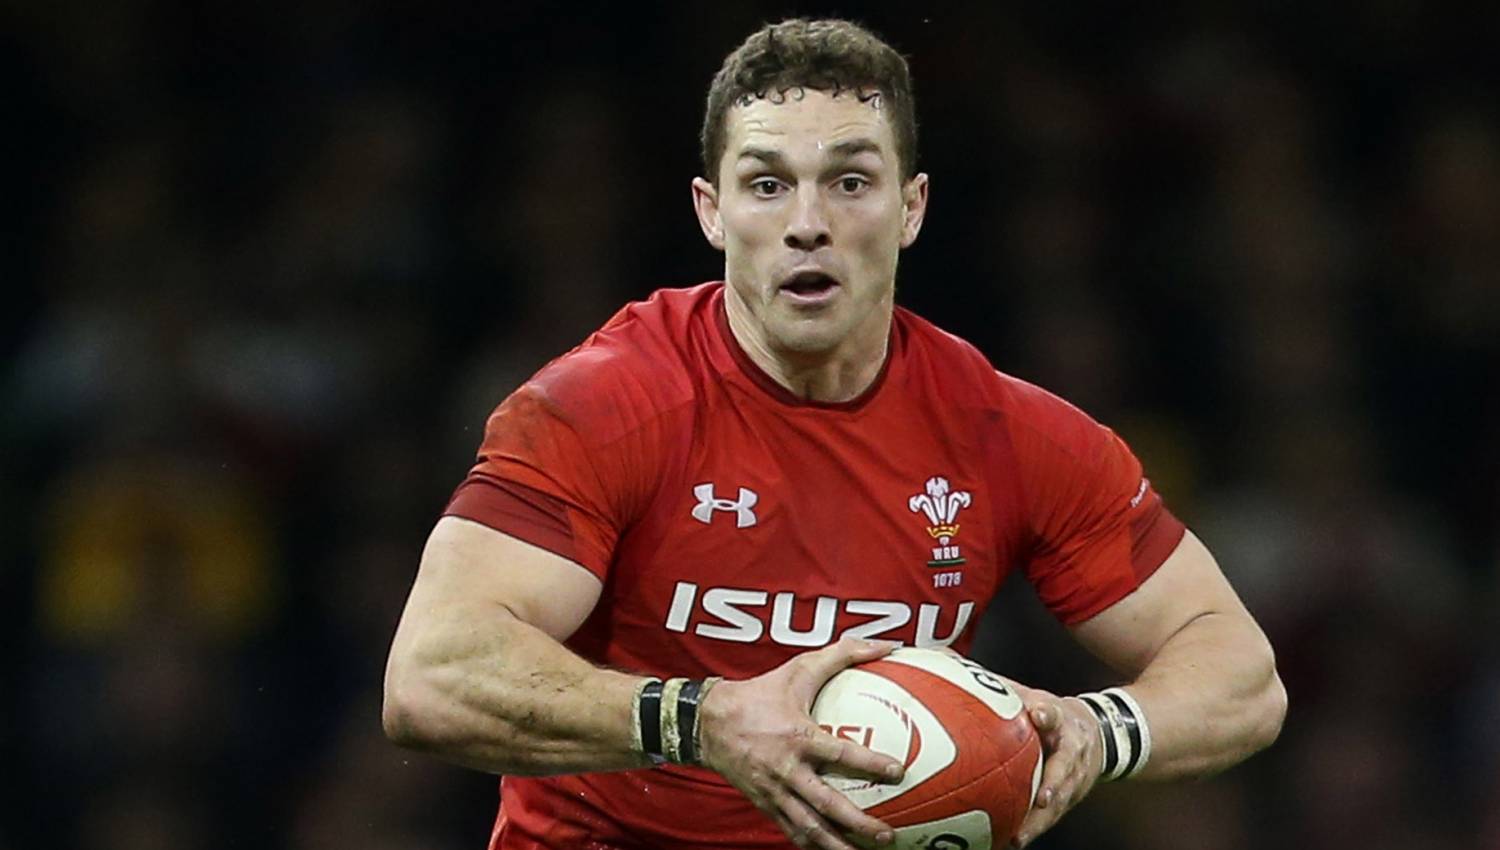 How tall is George North?